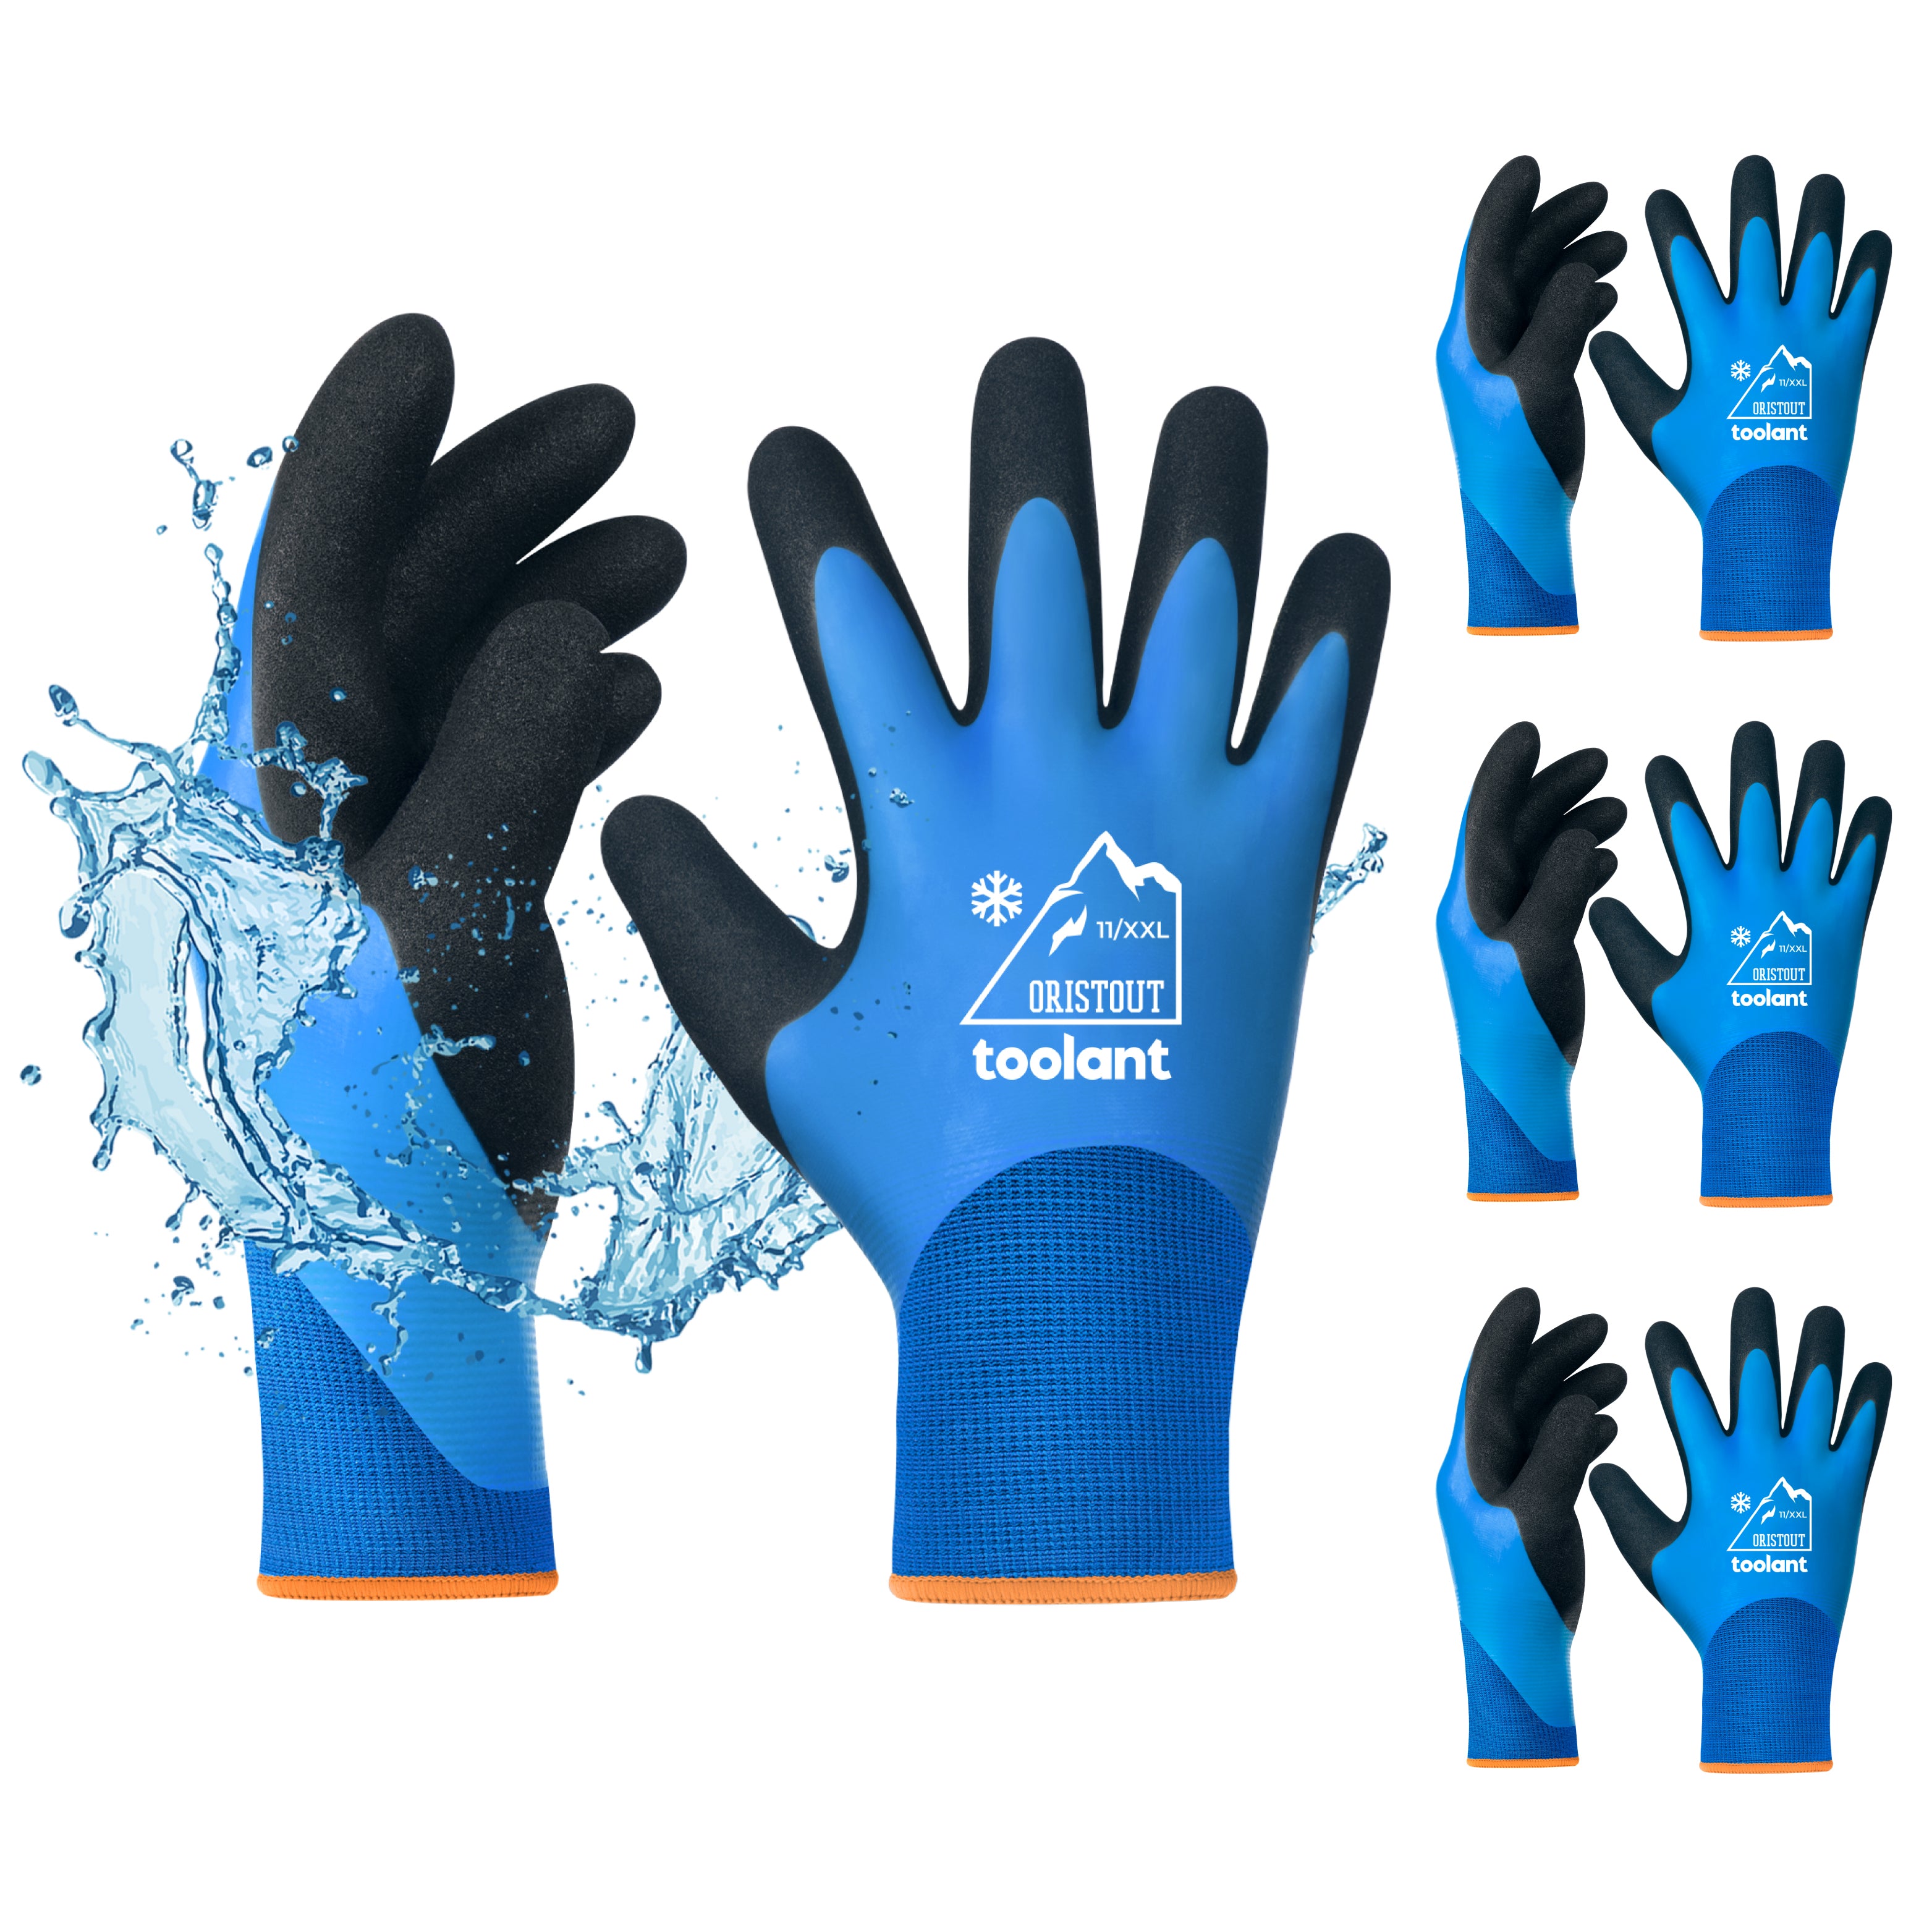 THERMAL INSULATED WINTER WARM WATERPROOF WORK GLOVES FREEZER COLD